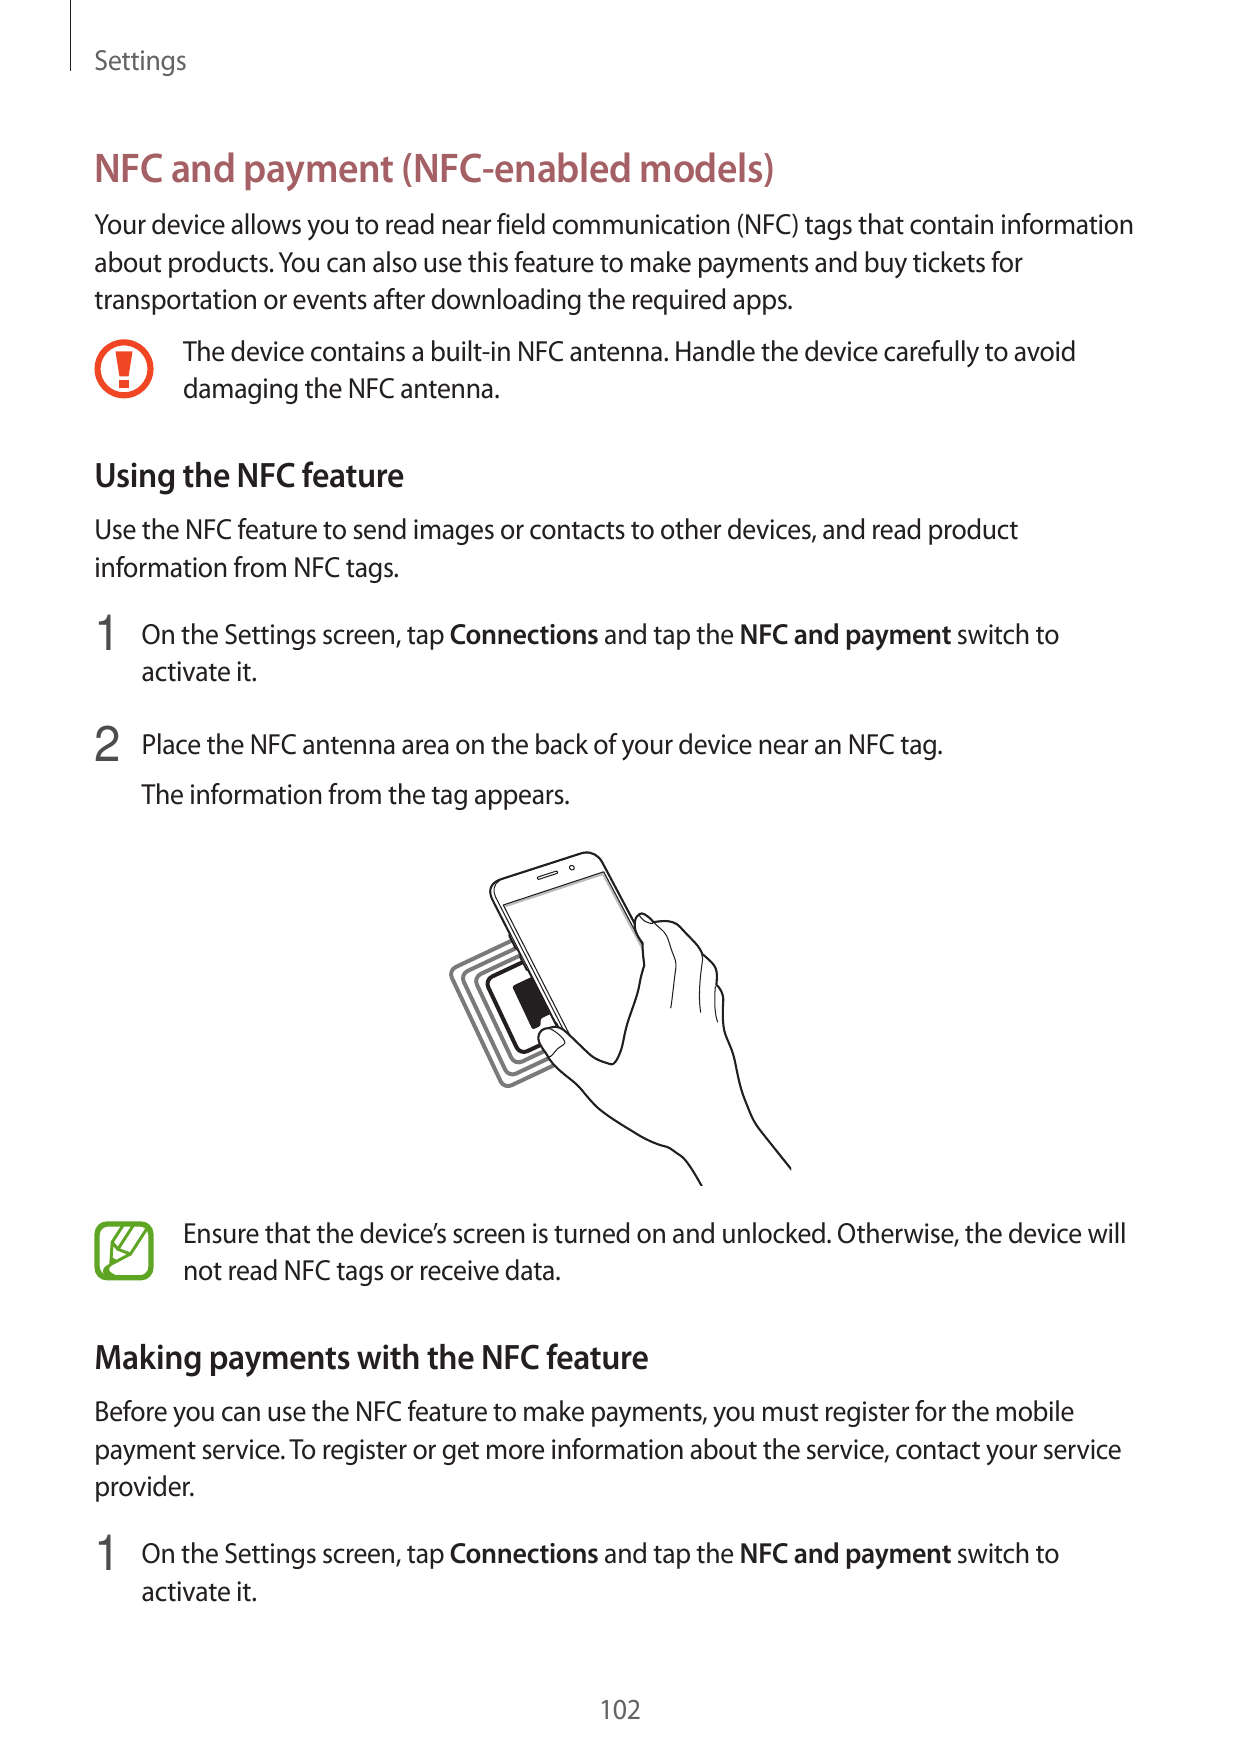 SettingsNFC and payment (NFC-enabled models)Your device allows you to read near field communication (NFC) tags that contain info